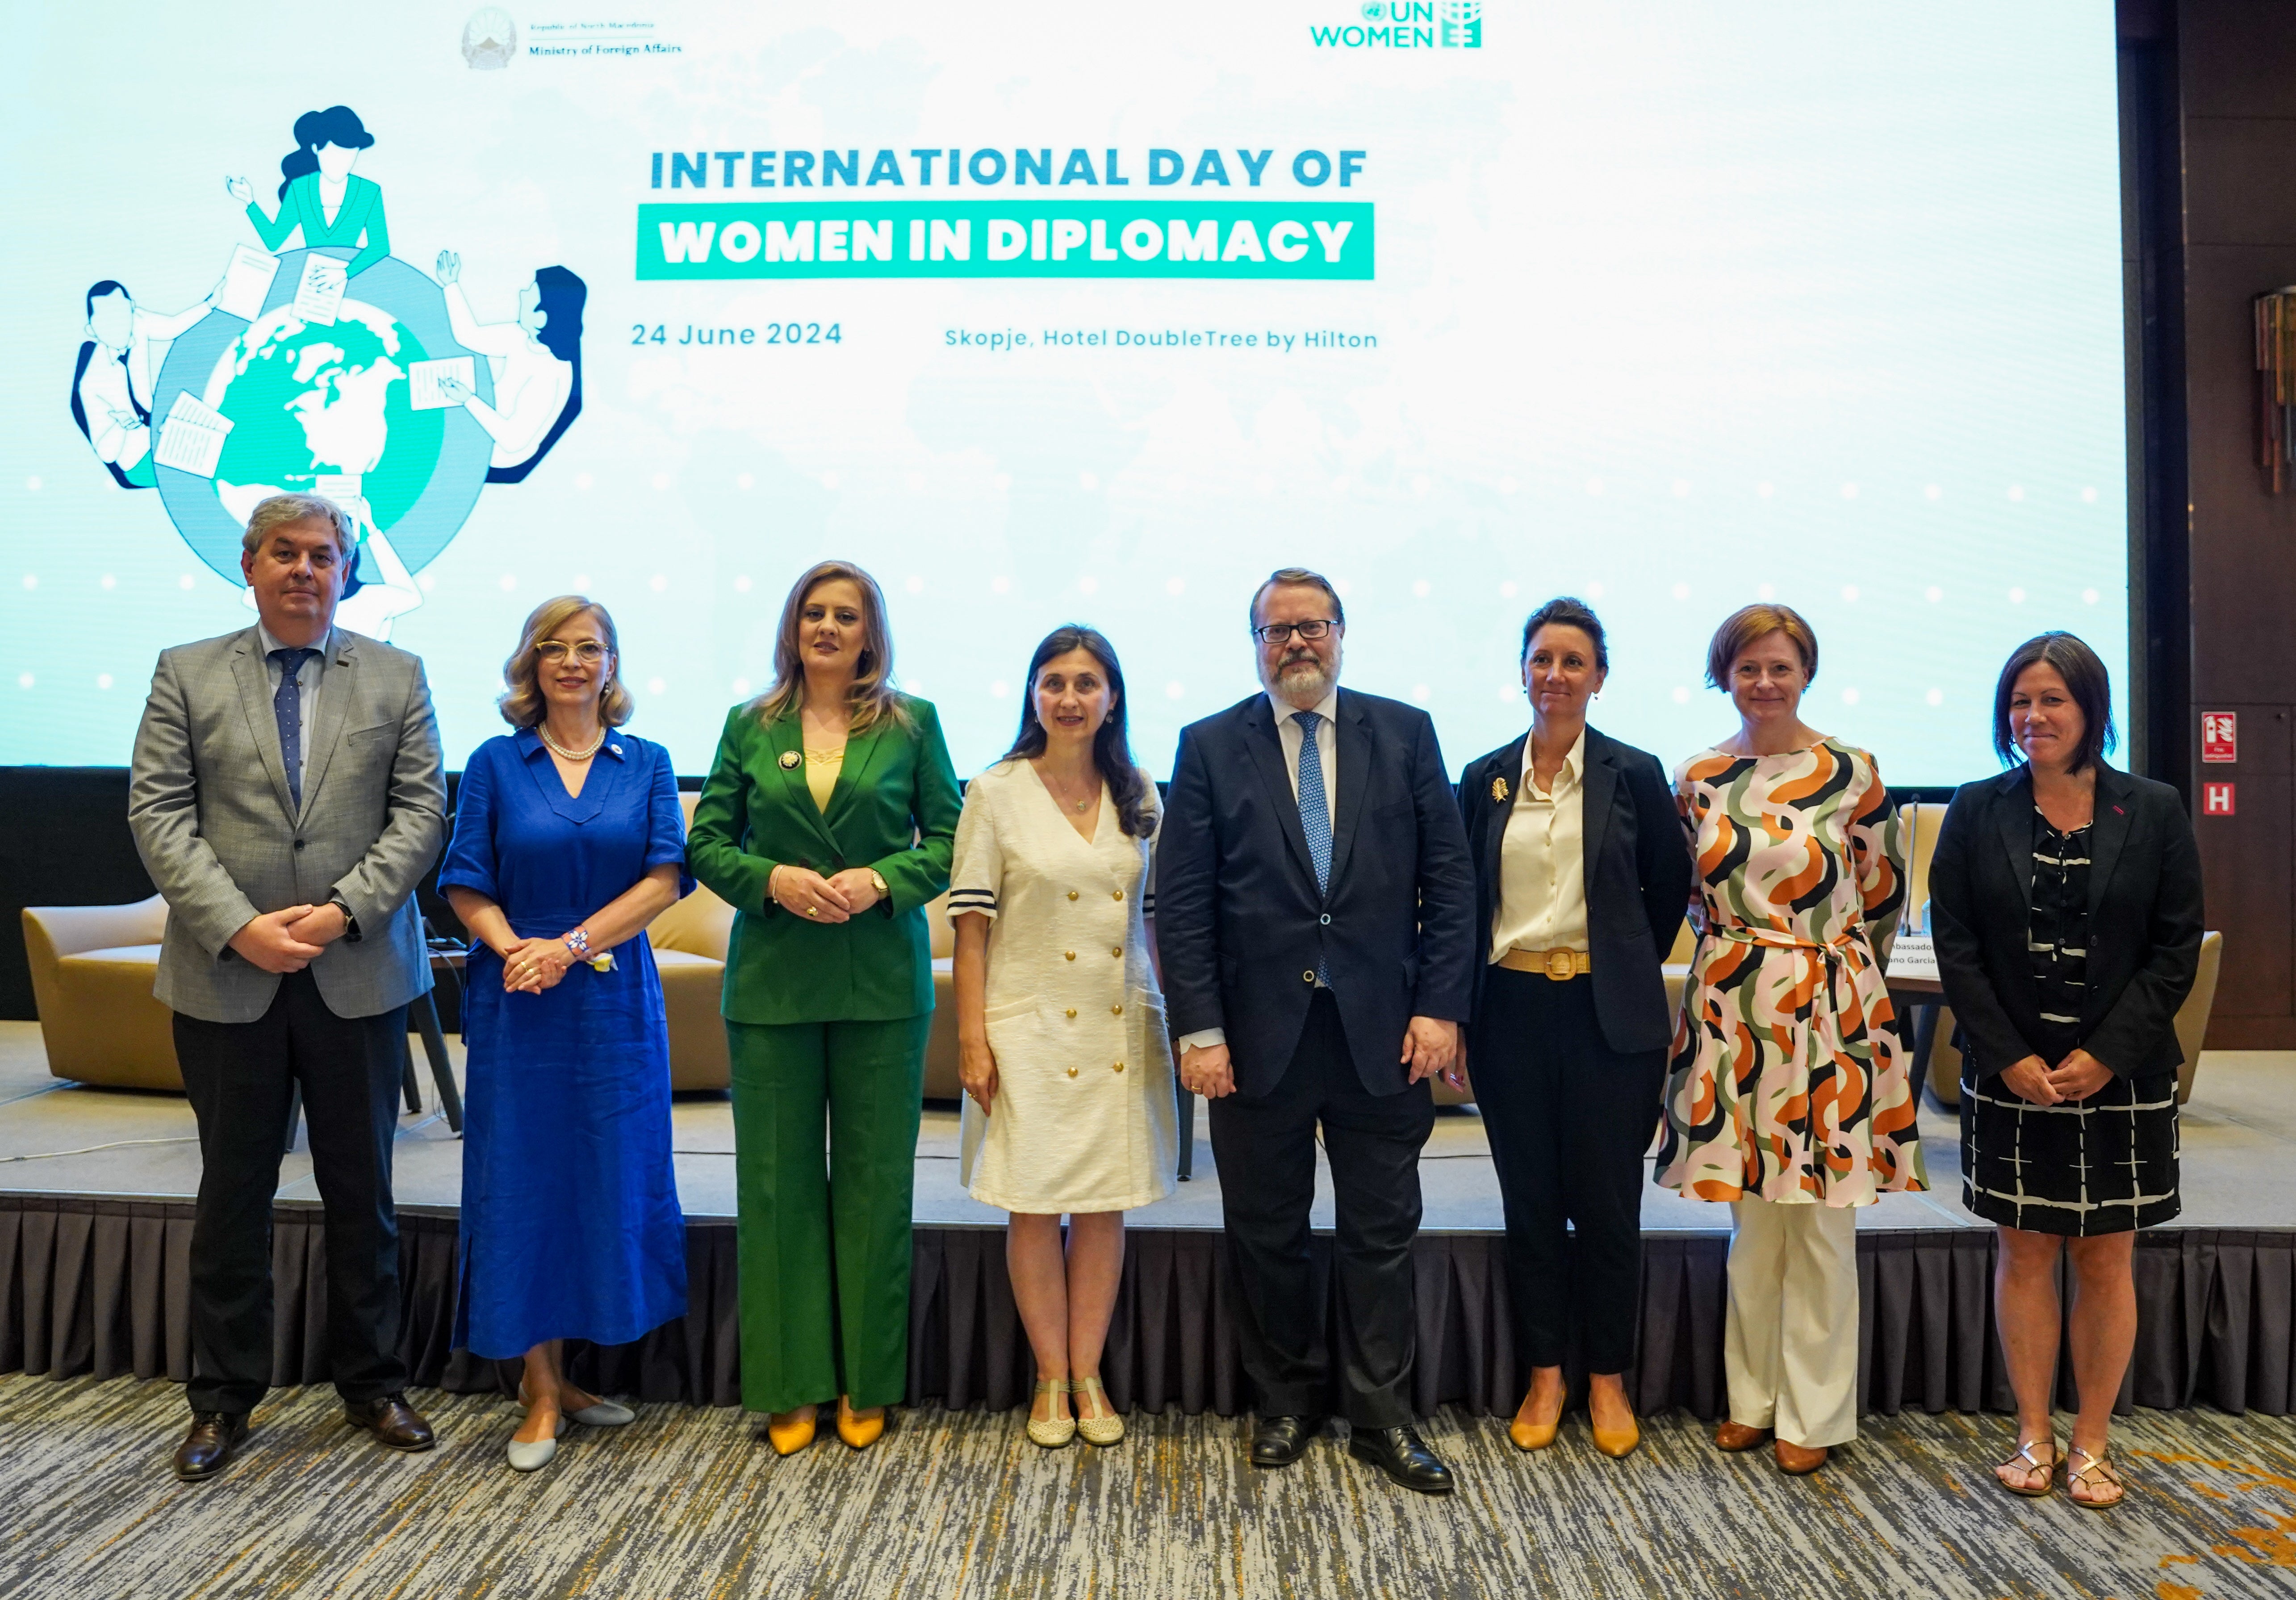 UN Women and the Ministry of Foreign Affair, for a second consecutive year, marked the International Day of Women in Diplomacy with a high-level panel discussion highlighting the pivotal role that women play in international relations and diplomatic efforts. Photo: UN Women